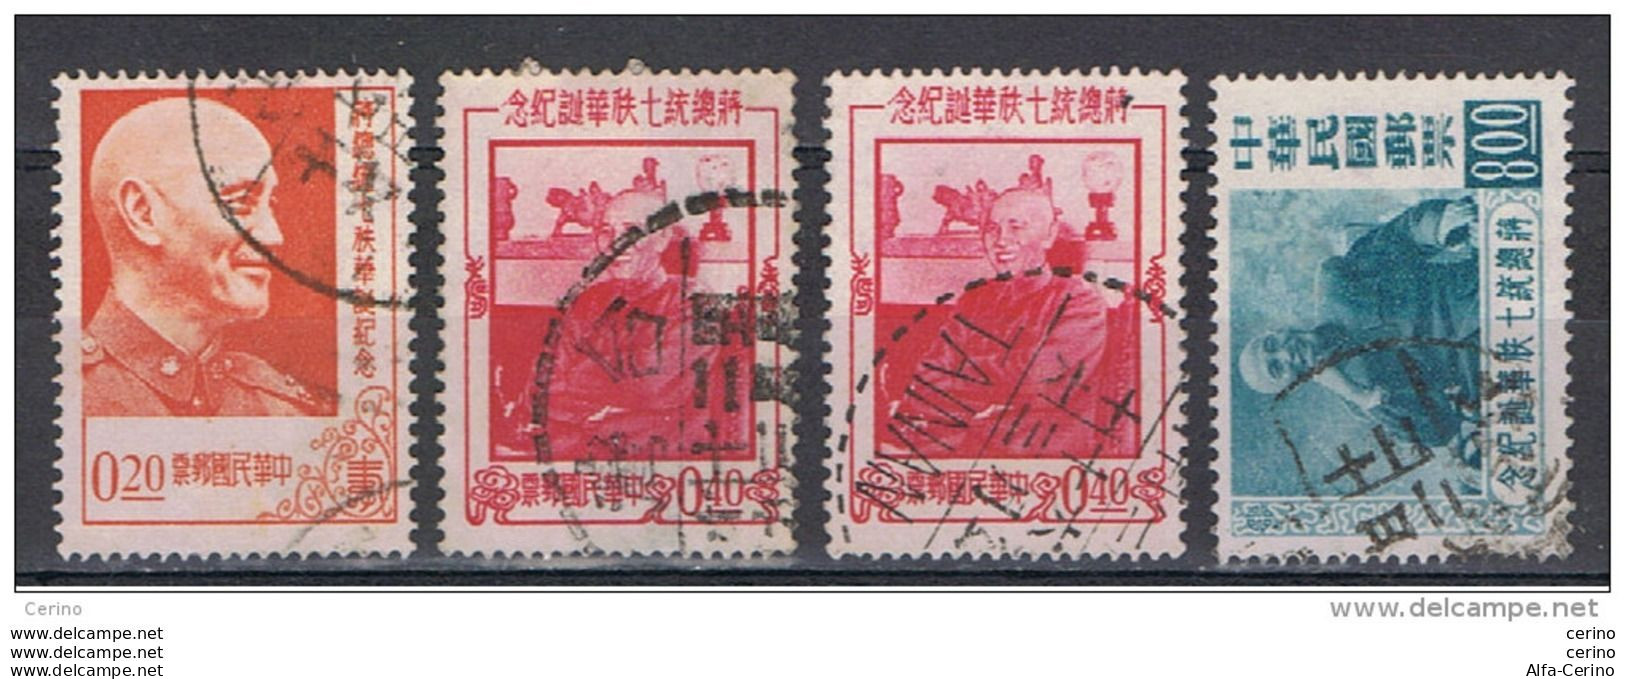 TAIWAN:  1956  ANNIVERSARY  -  4  USED  STAMPS  -  YV/TELL. 213//218 - Oblitérés